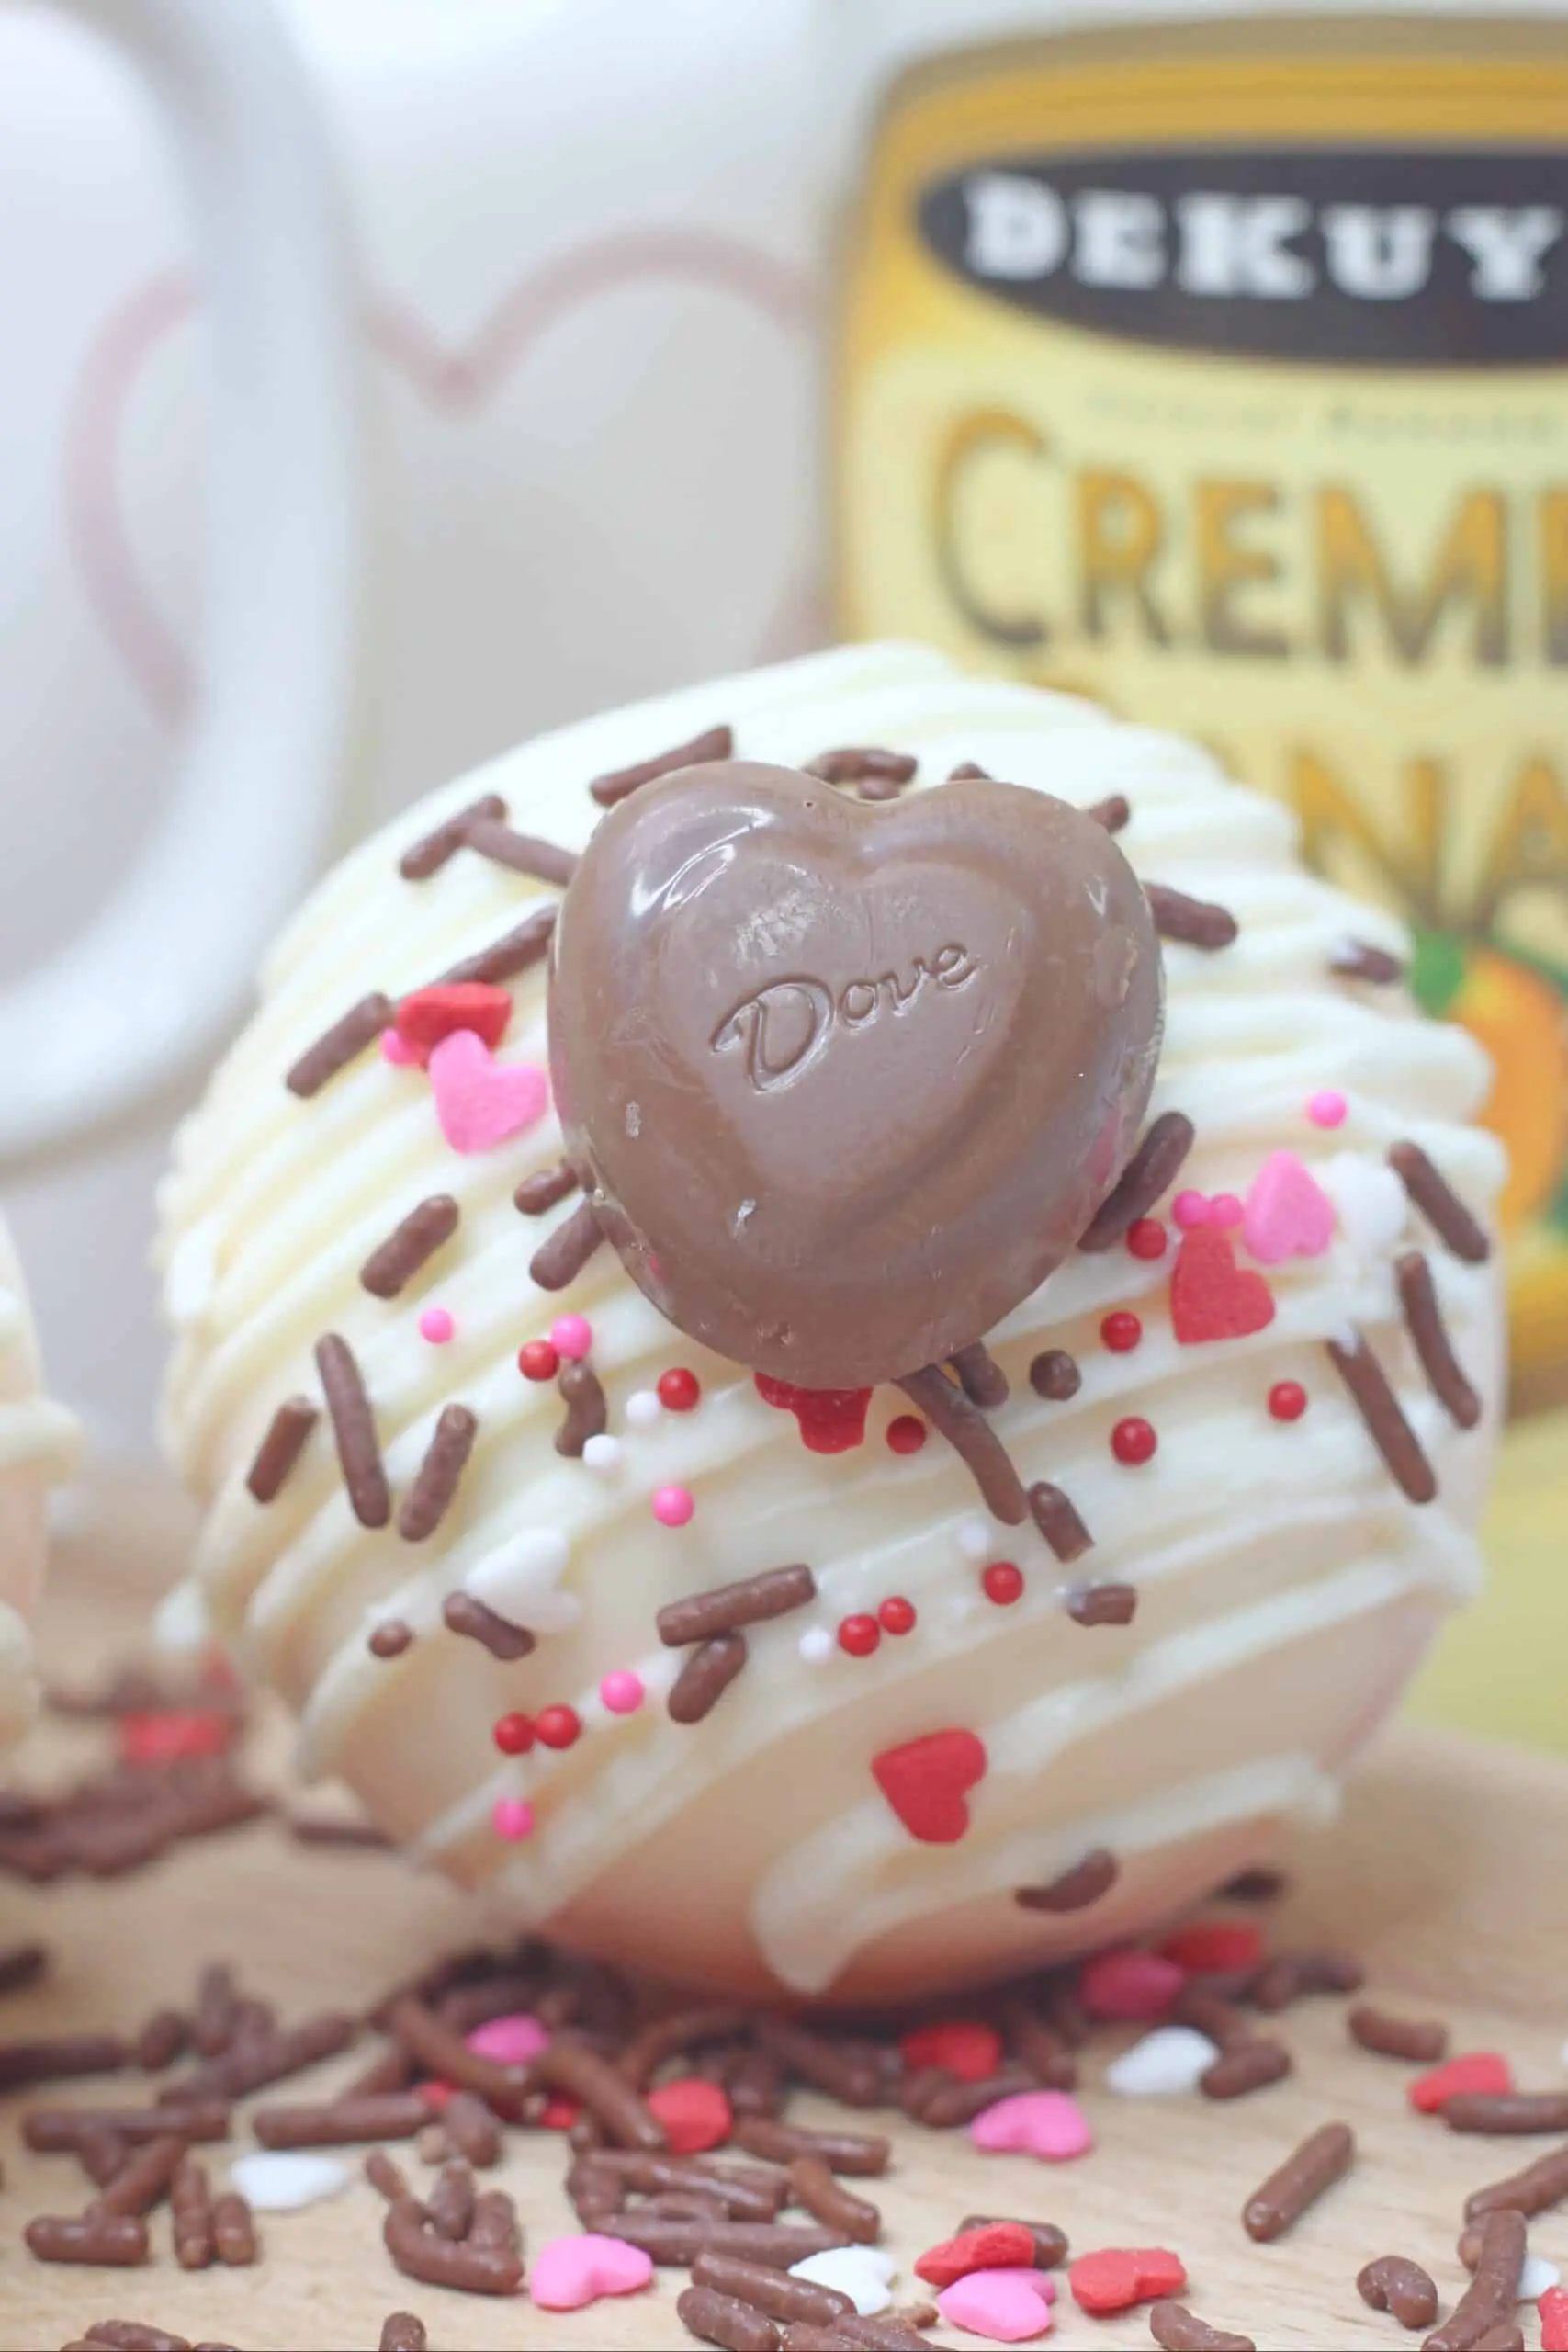 Spiked Valentine's Day Hot Chocolate Bomb!